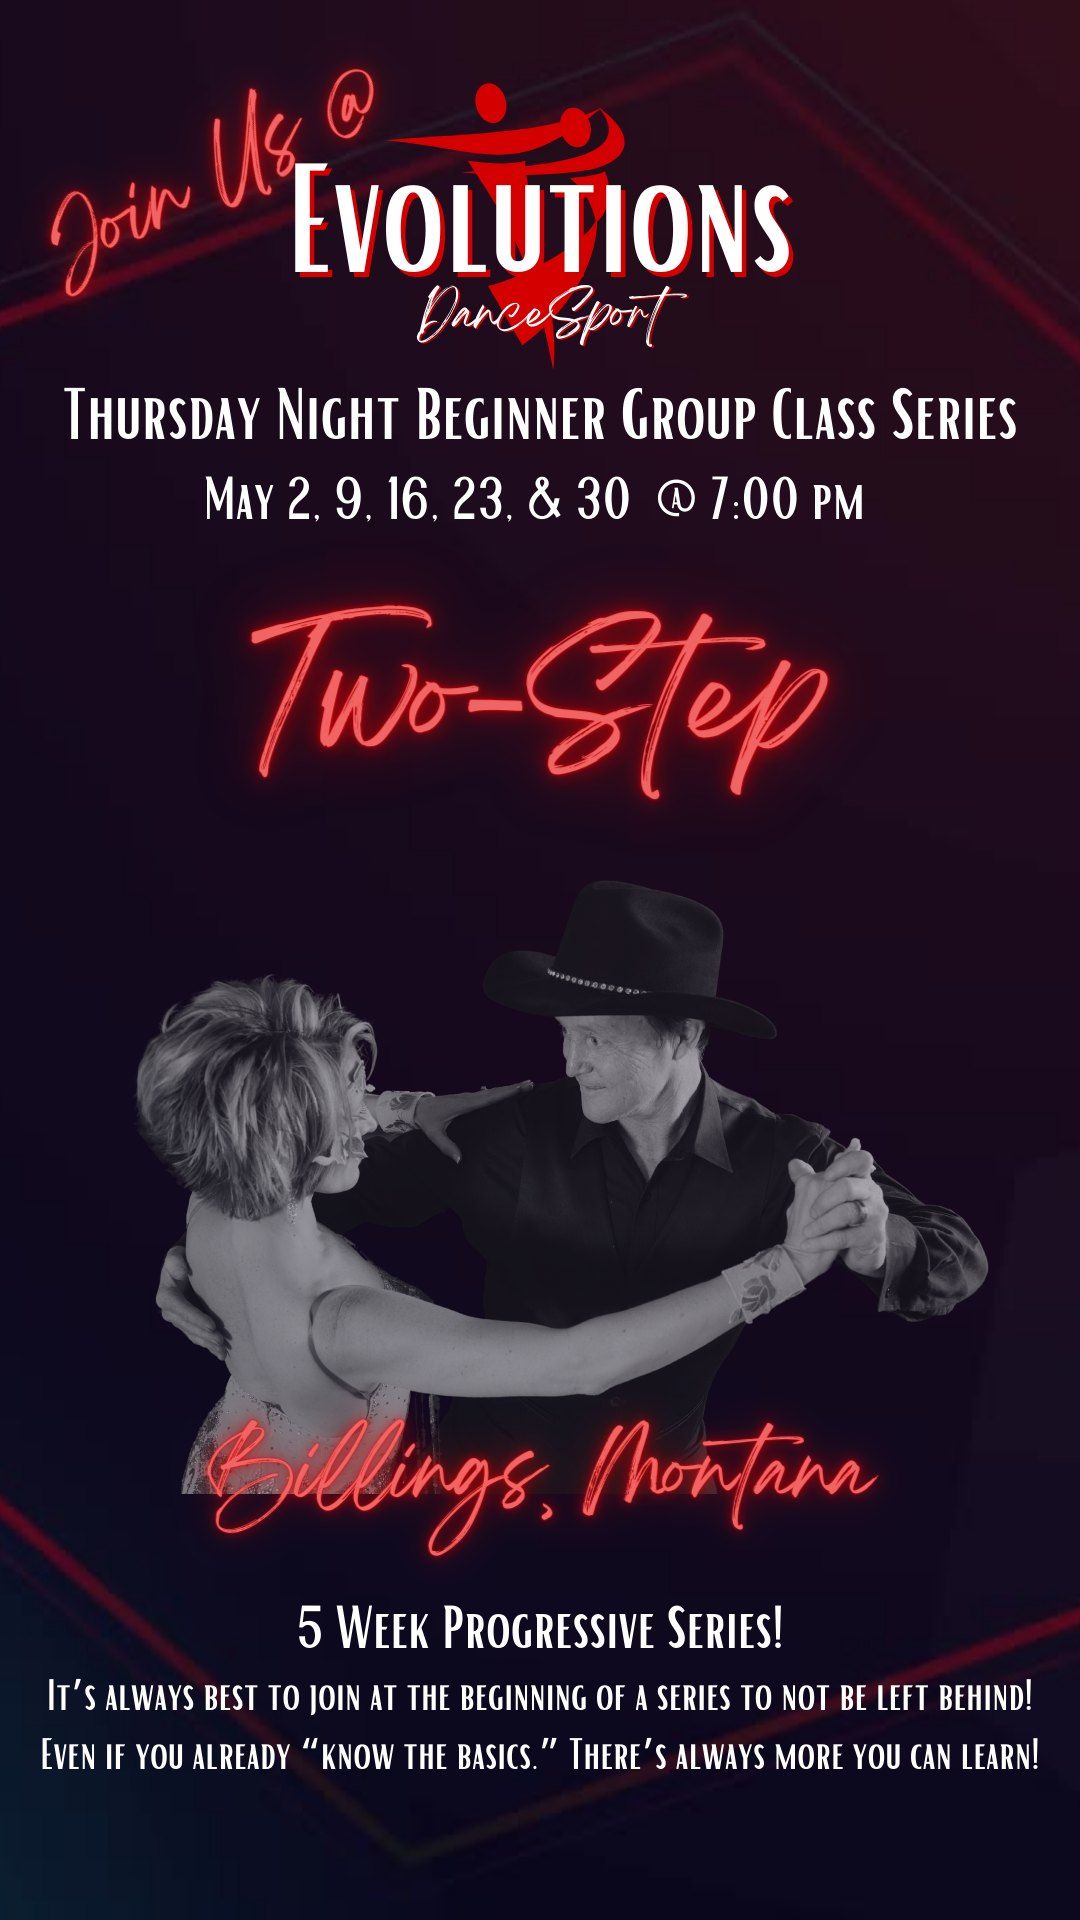 Thursday Night Beginning Two-Step Group Class Series (5 Weeks!)